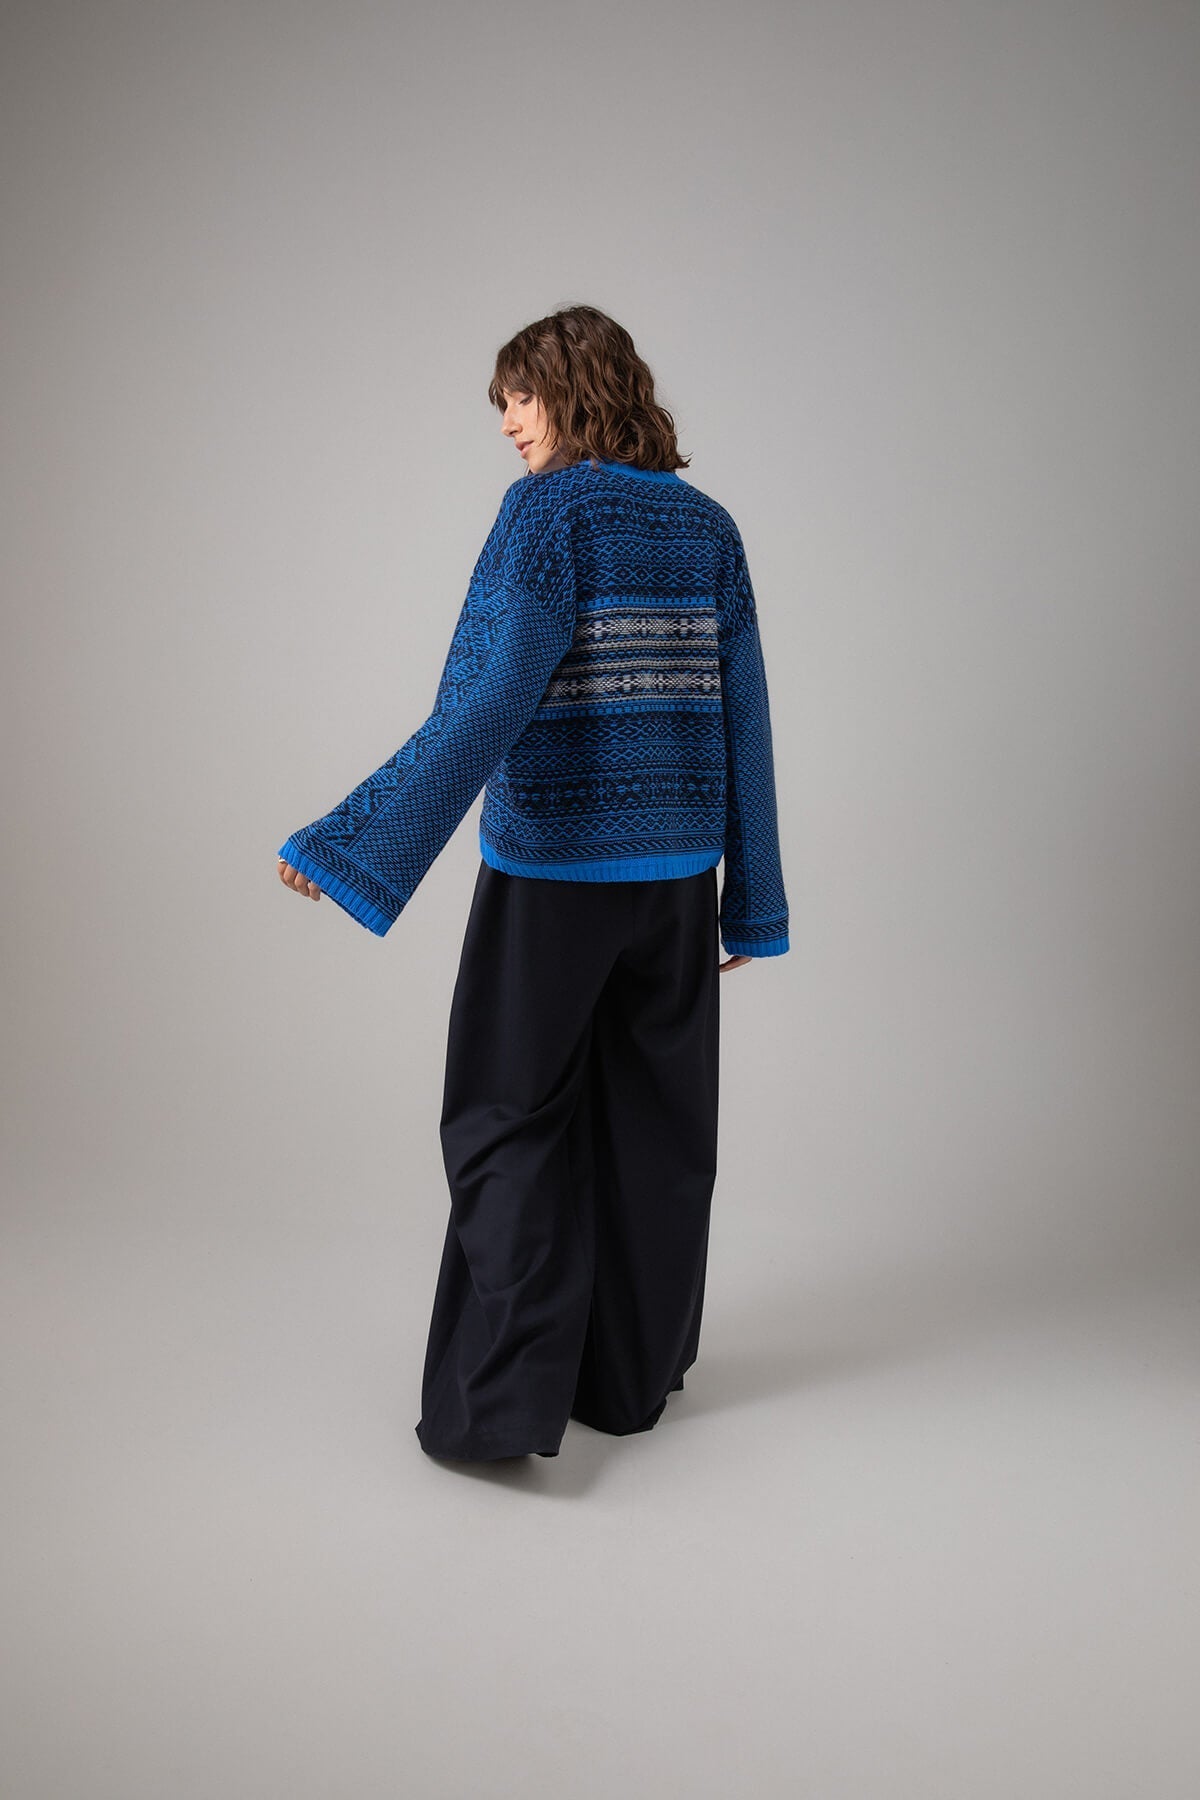 Back of Johnstons of Elgin Women's Round Neck Traditional Sanquhar Fairisle Cashmere Sweater in Orkney Blue worn with a Navy Trousers on a grey background KAC05099Q23725